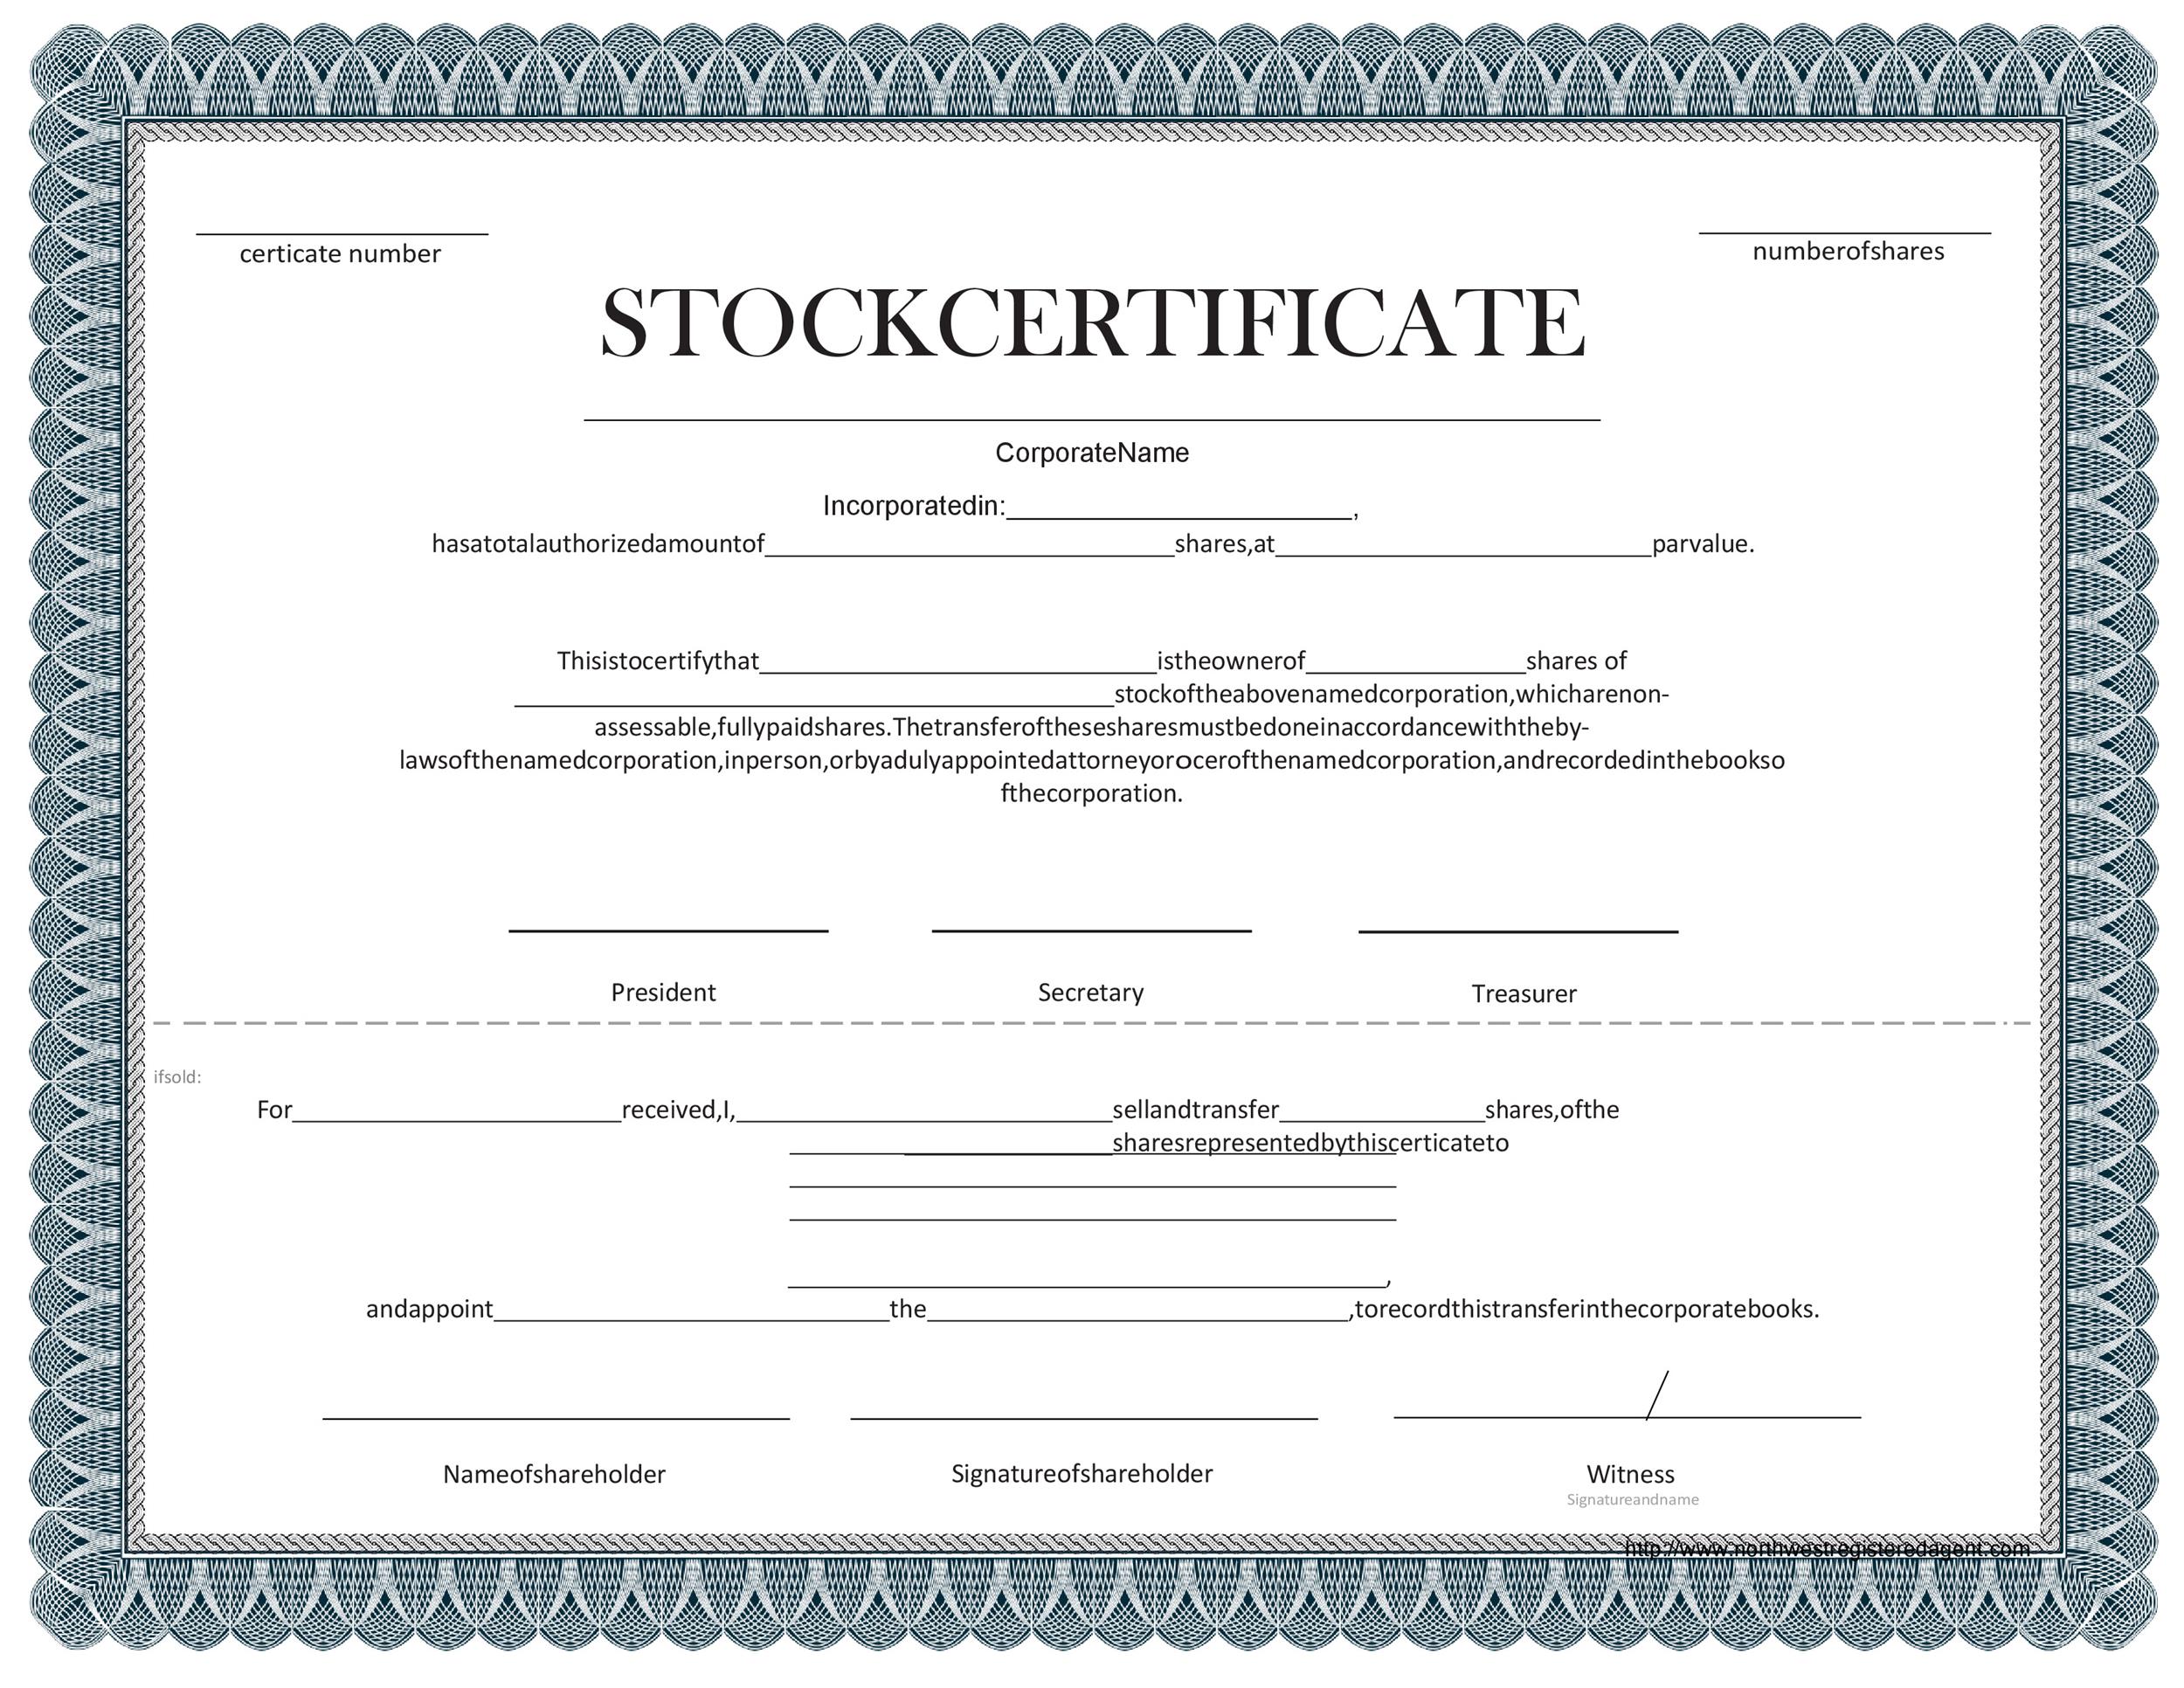 Share Certificate Template Excel - Captions Pages Throughout Share Certificate Template Australia